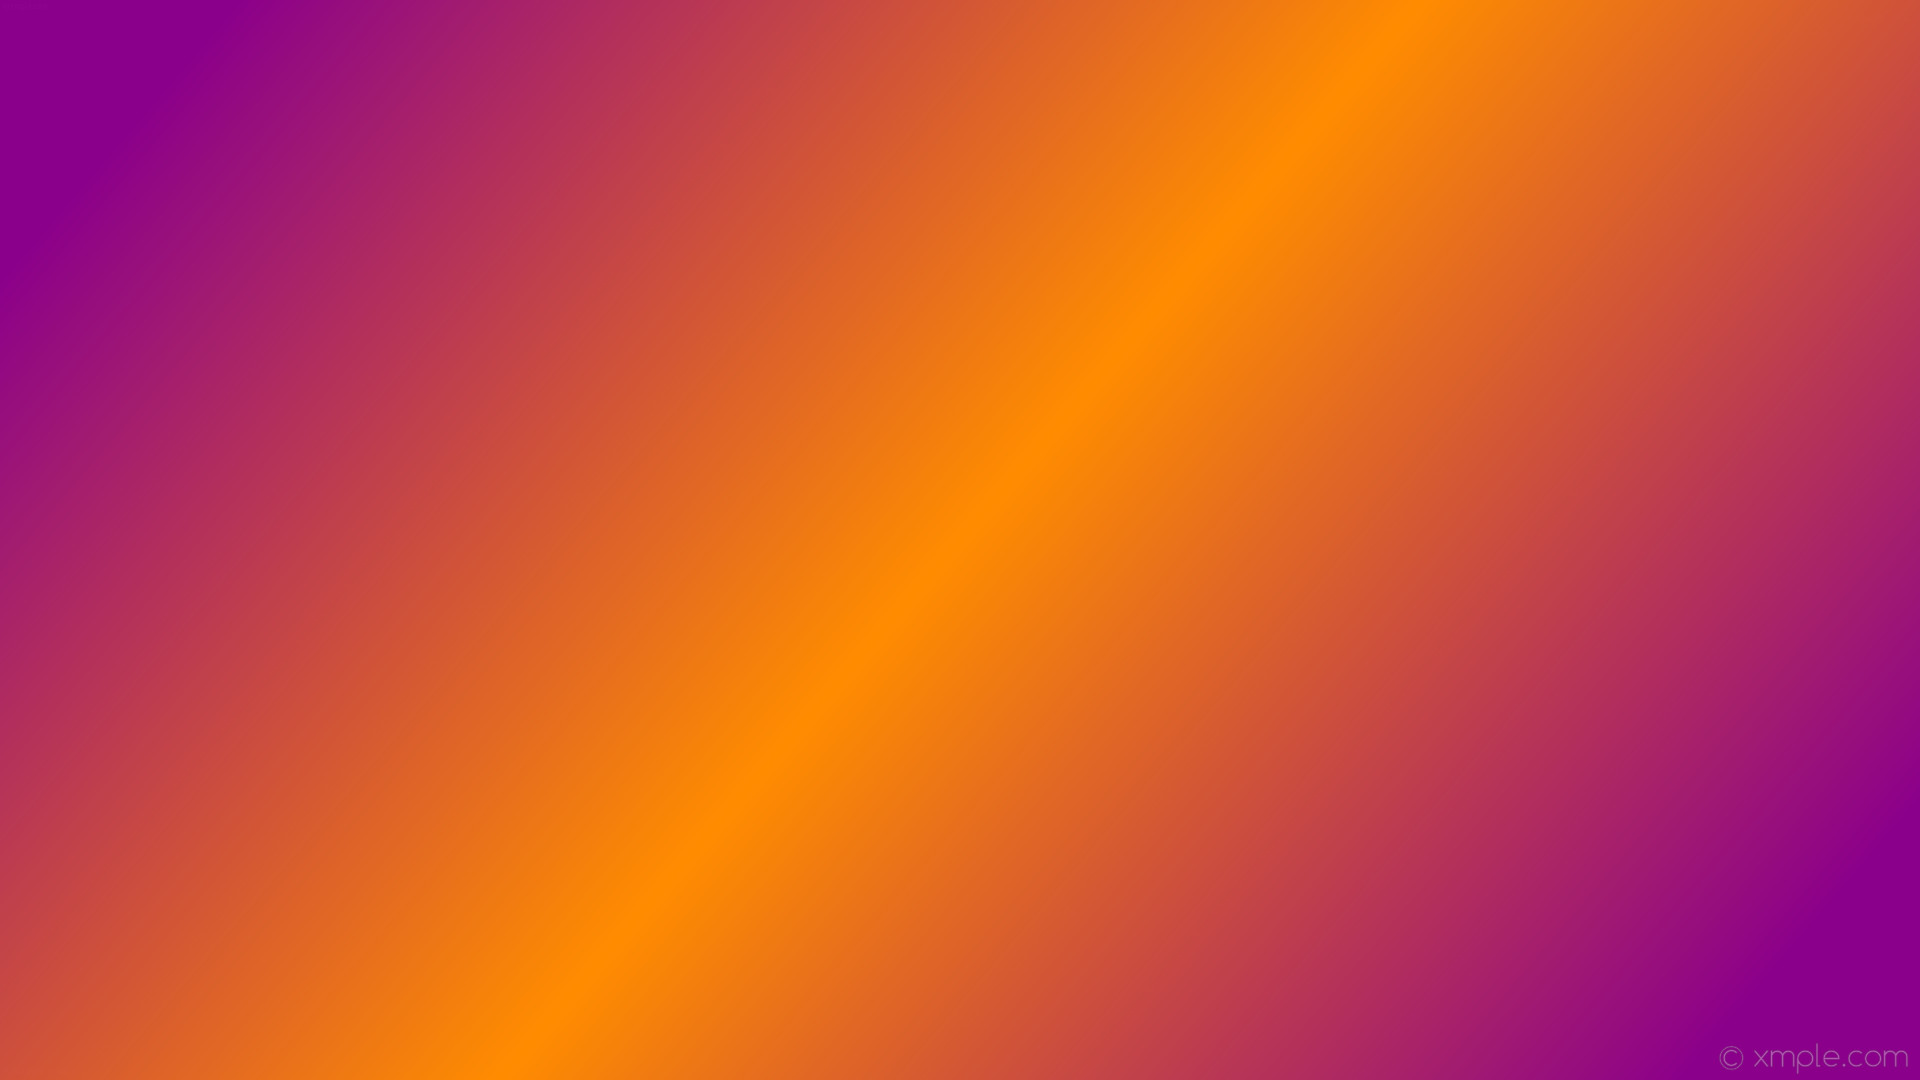 Orange And Purple Backgrounds 53 Images